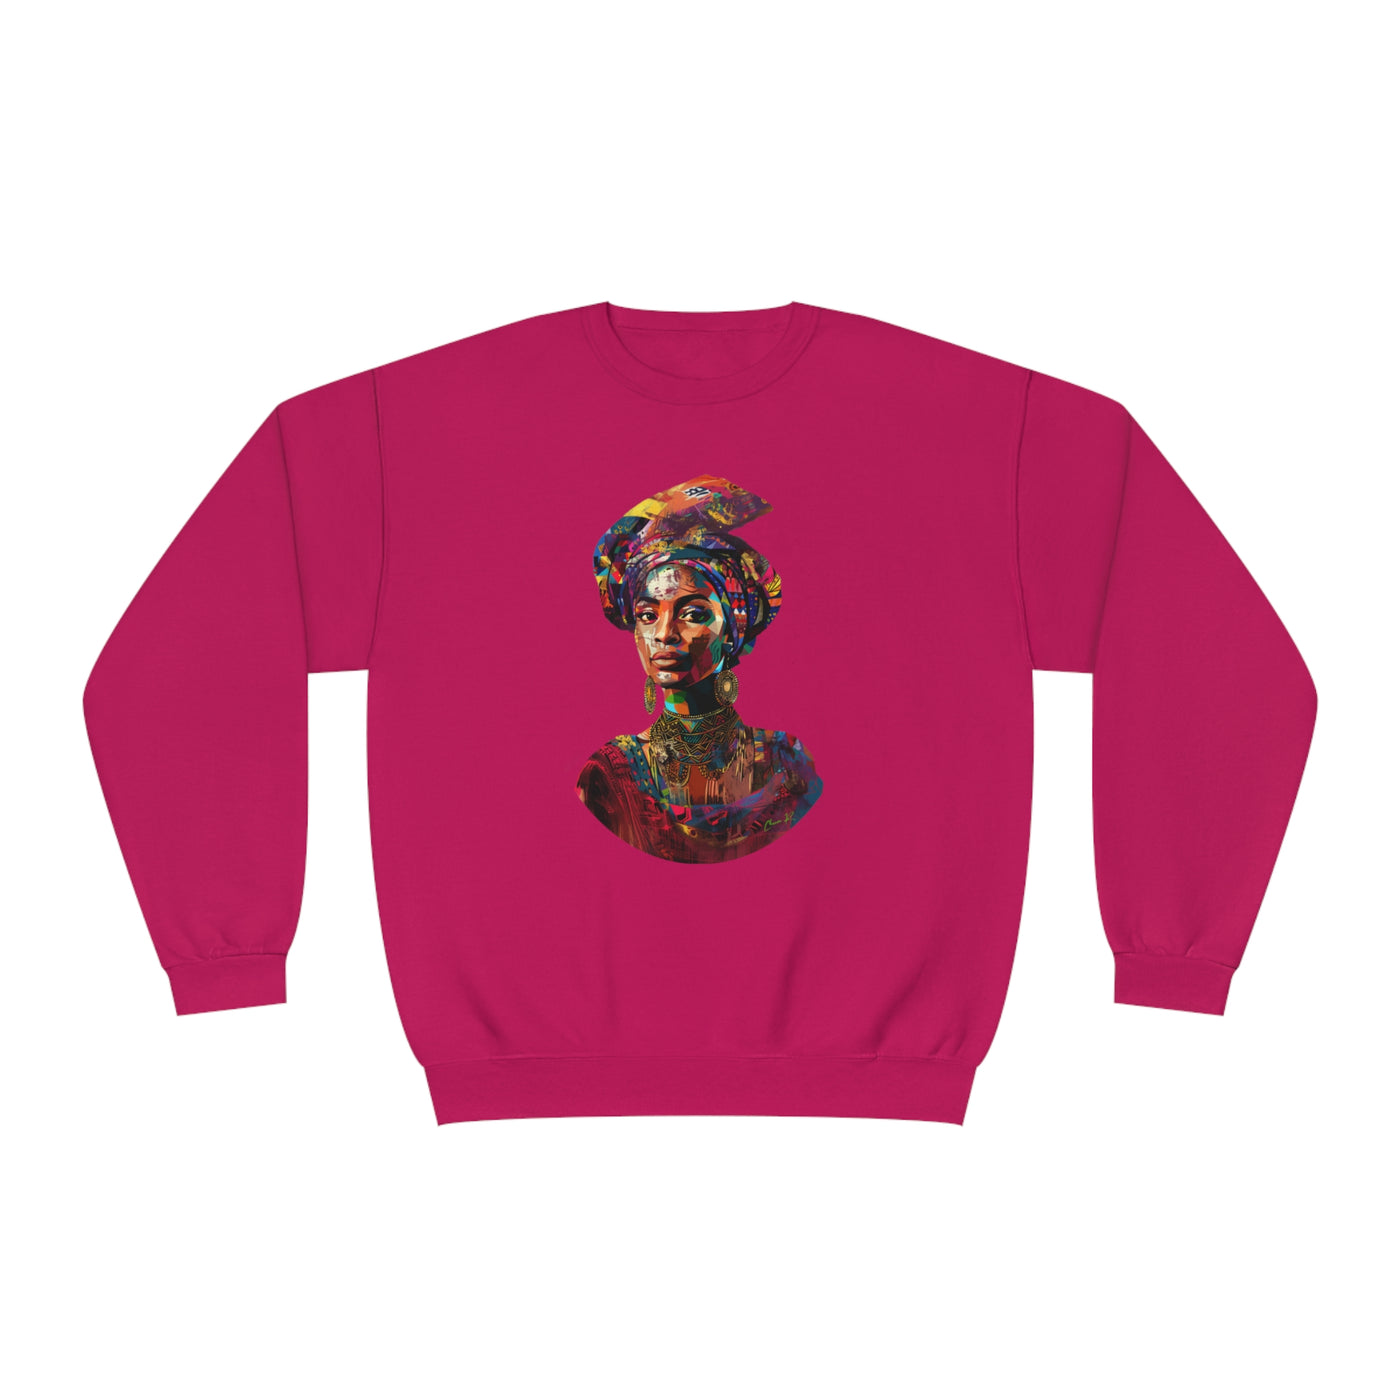 Regal Sweatshirt| Empower Her Collection | Mixy - G'wan by Charon